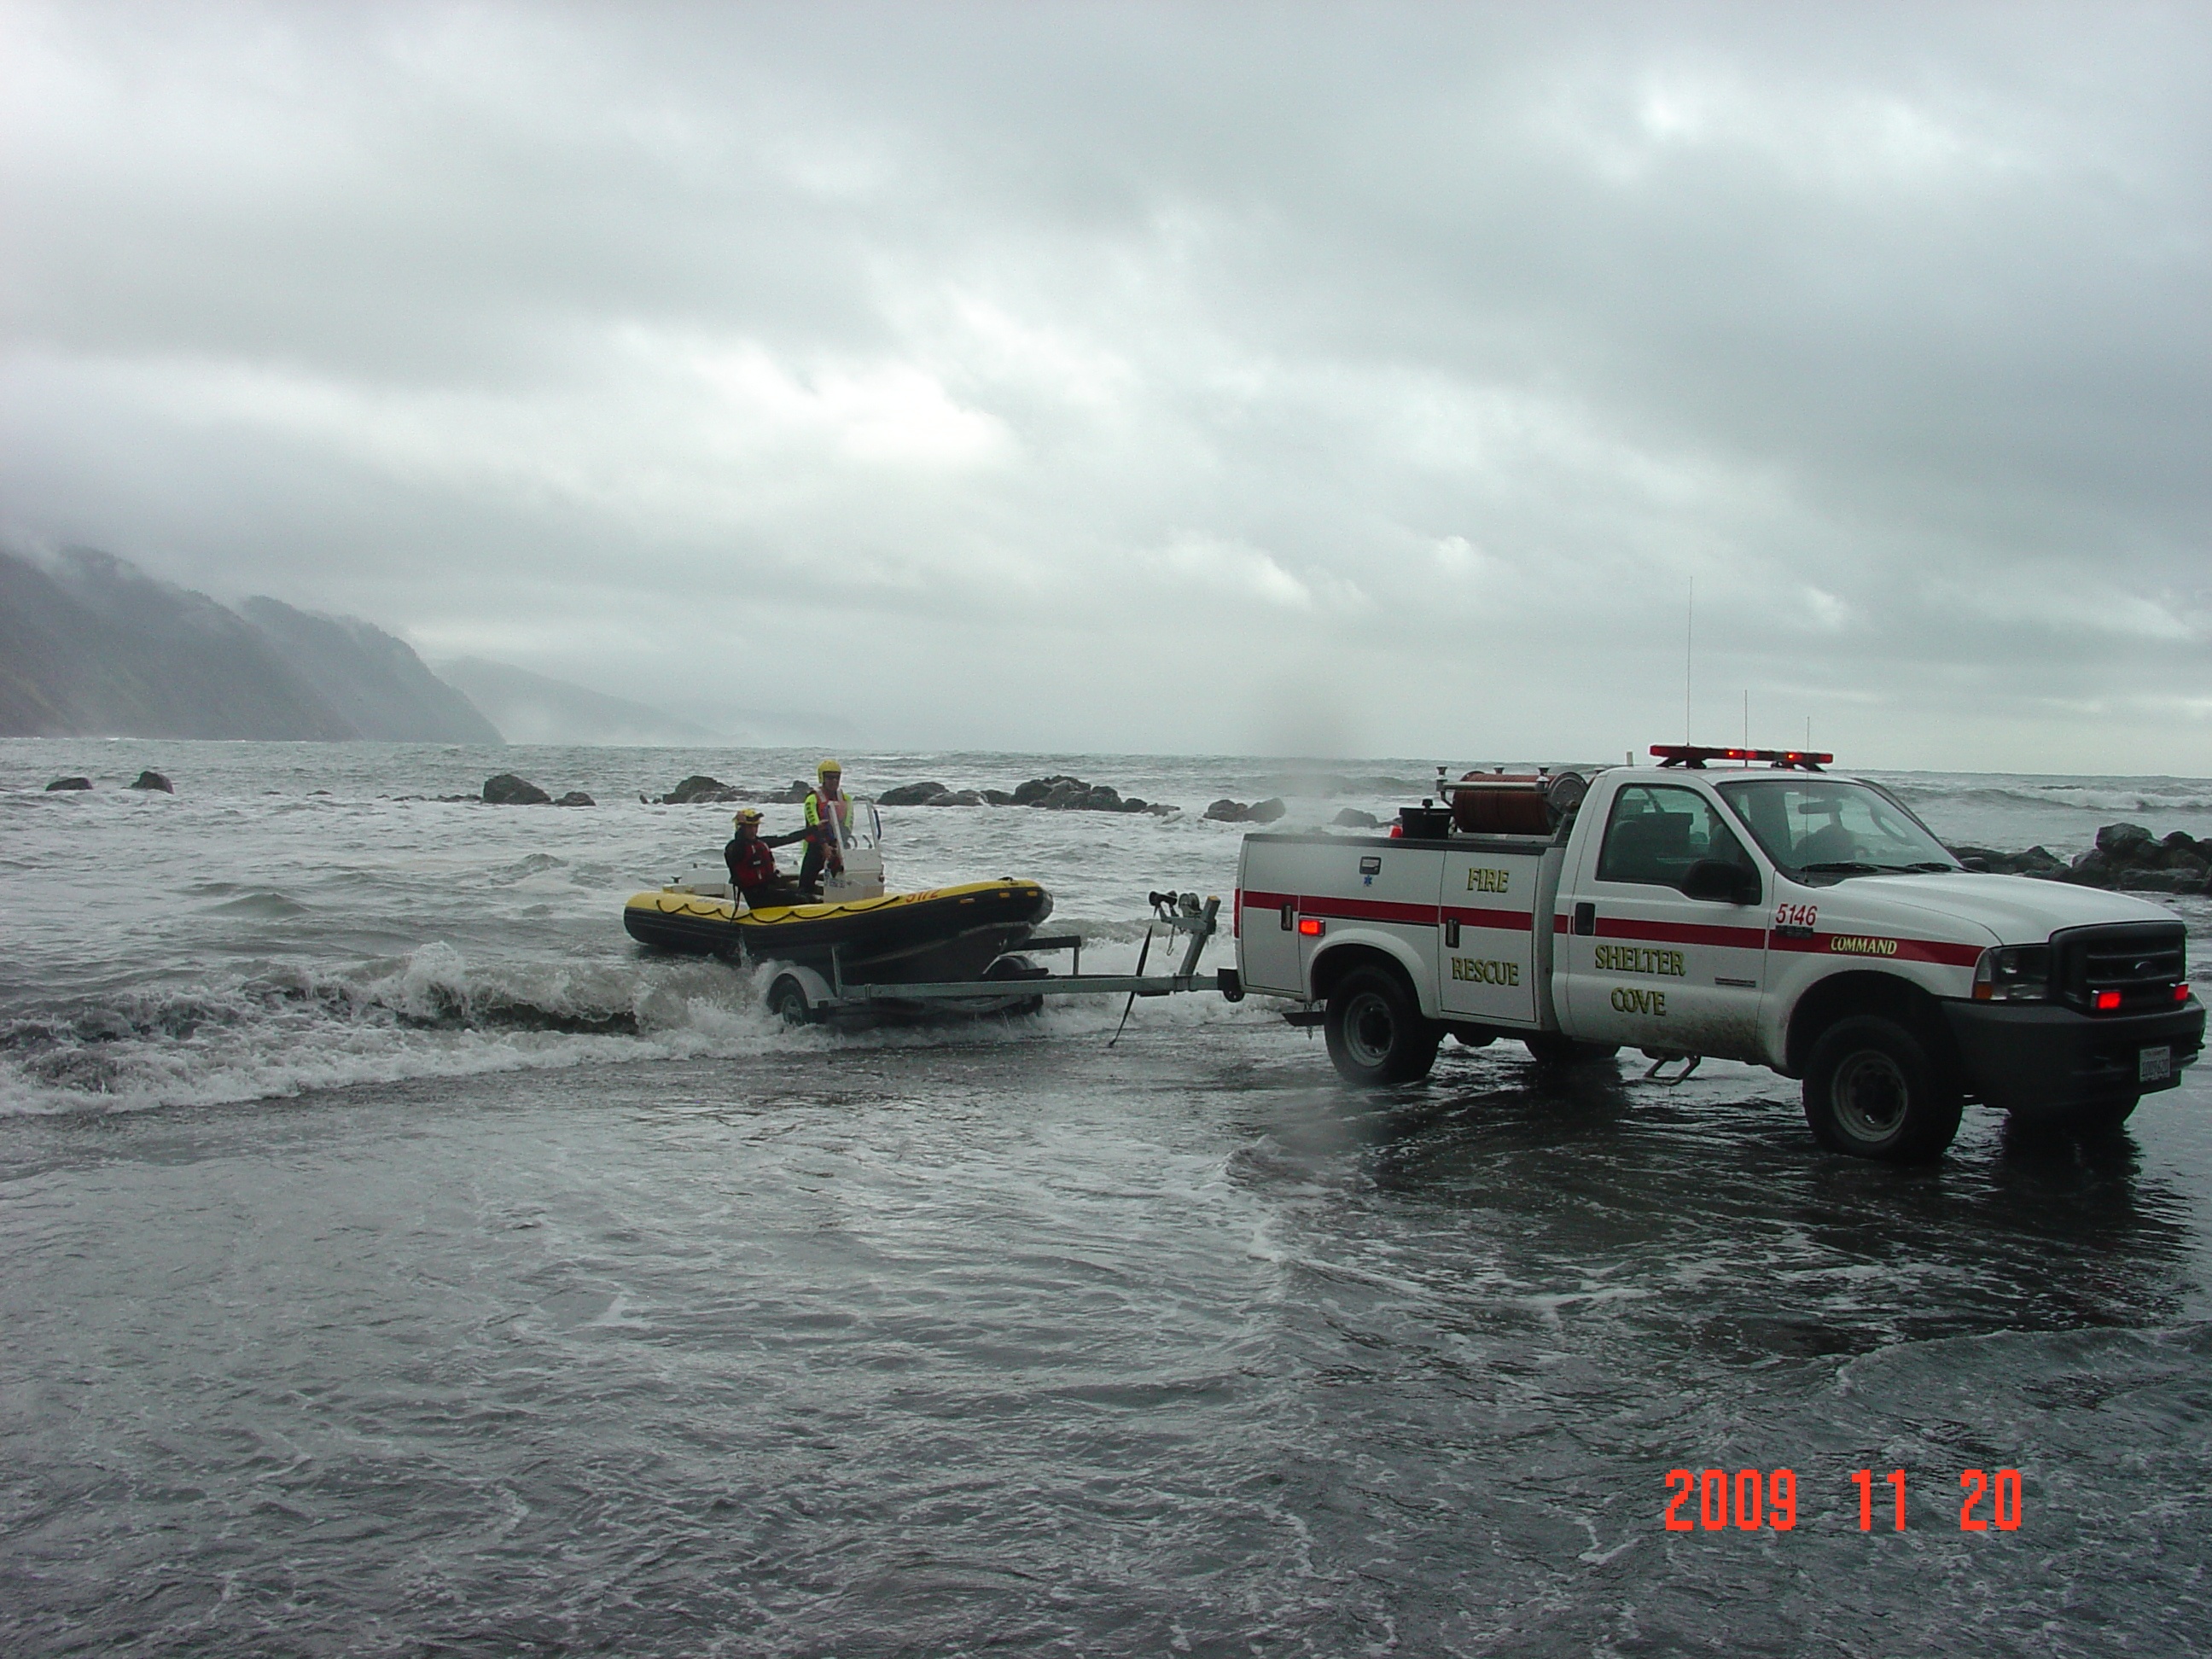 Ocean Rescue Boat being launched